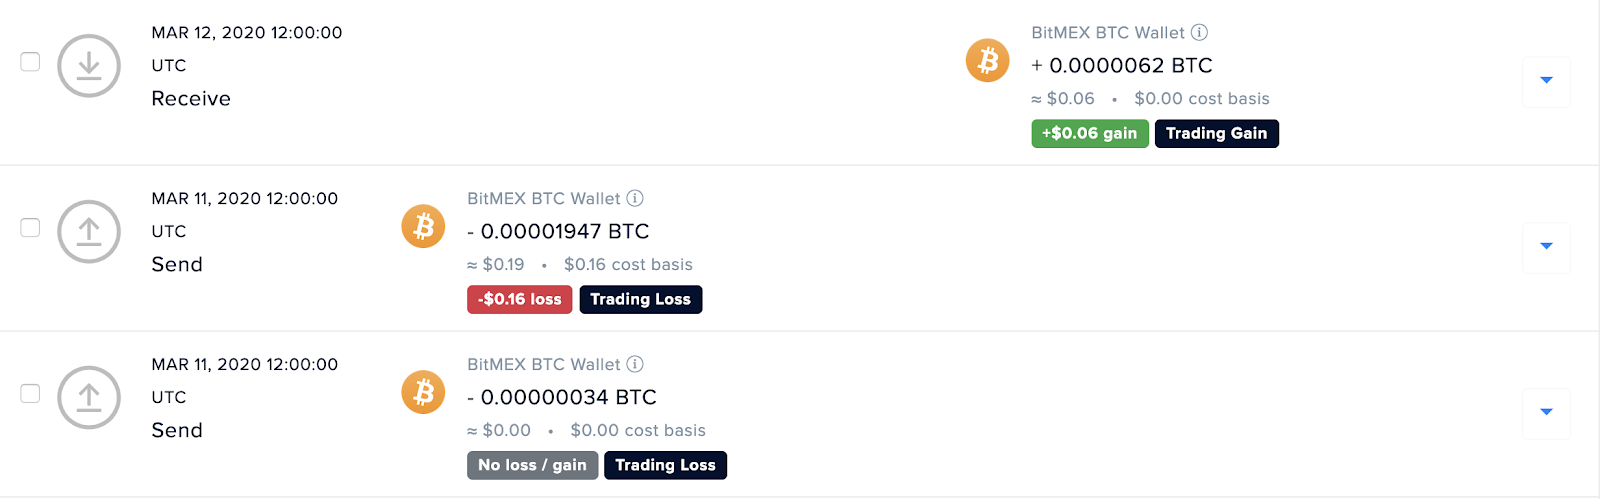 BitMEX trading gains and losses synced to CoinTracker